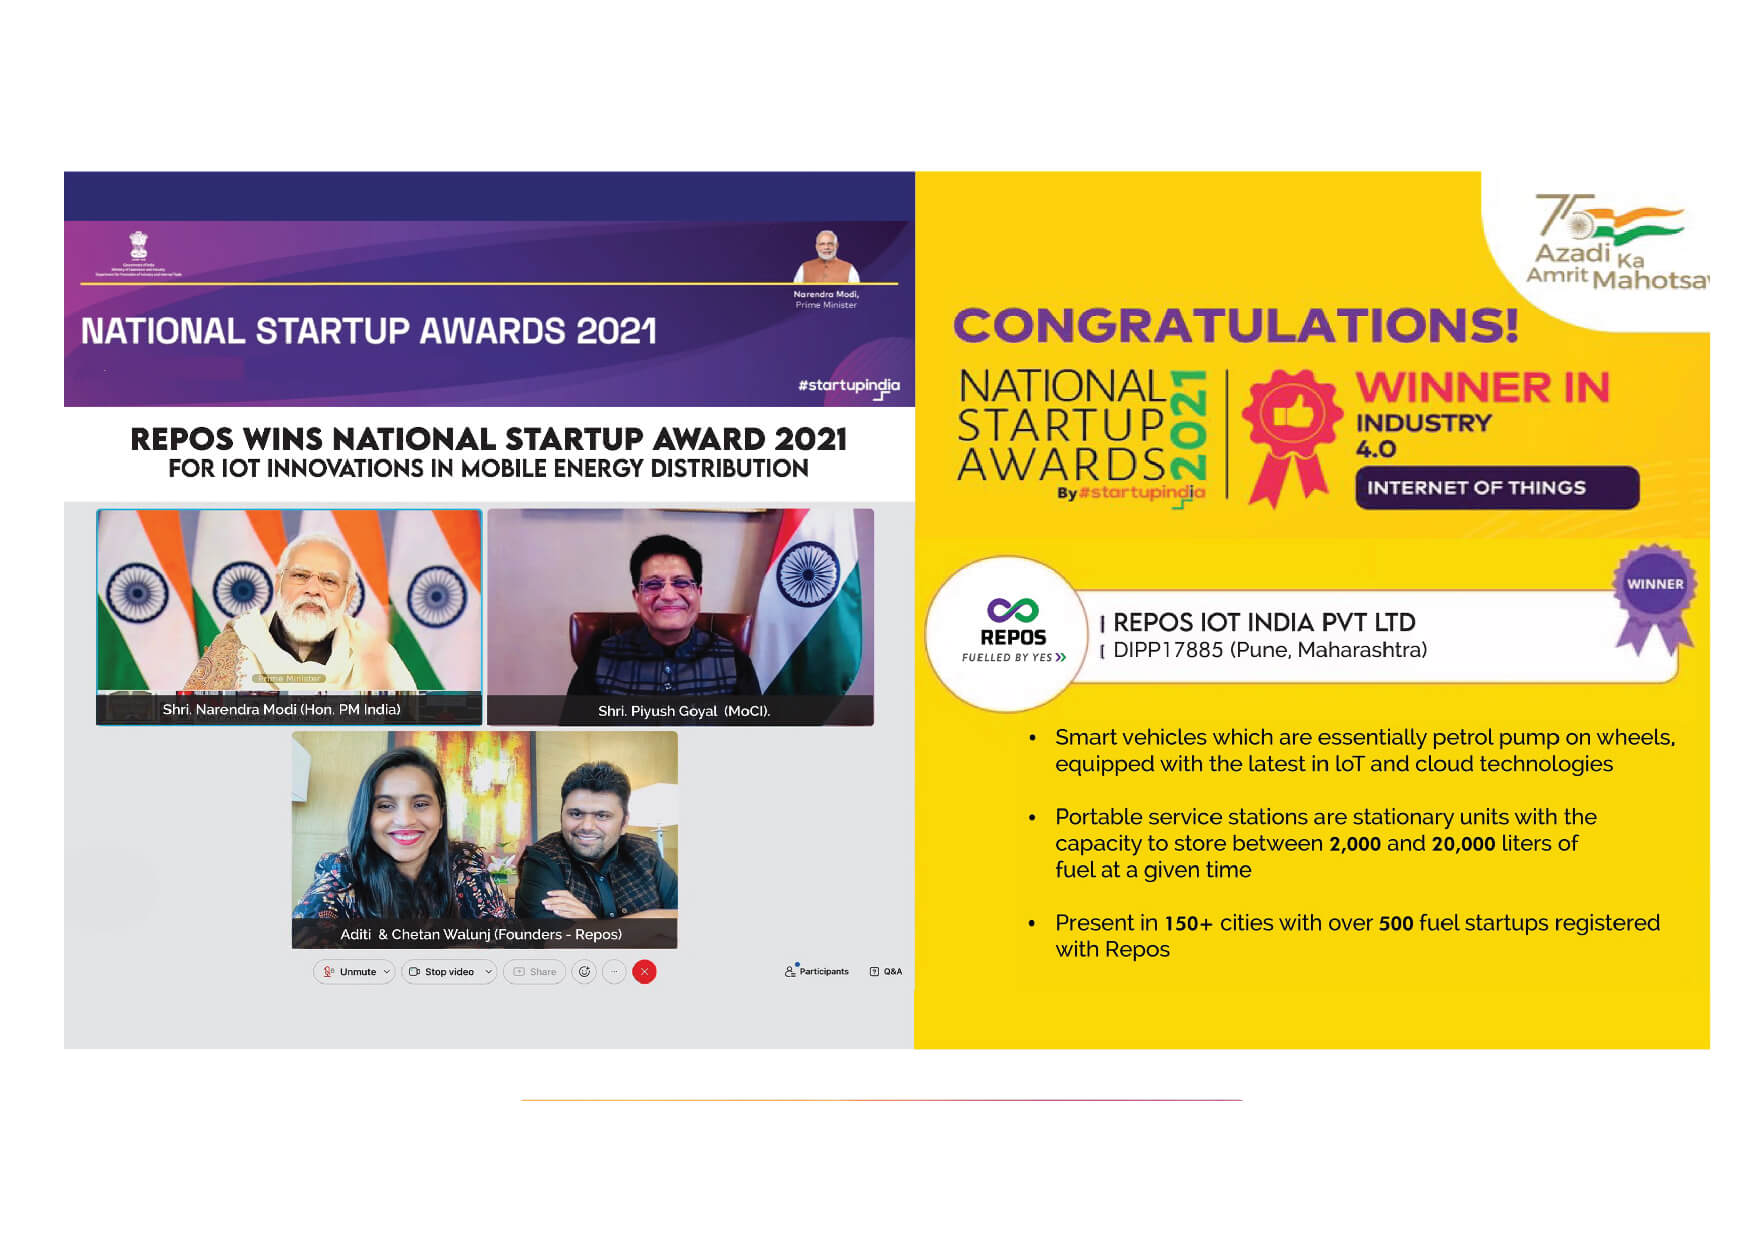 Winning the National Startup Award only strengthened our belief and vision for the future of energy distribution.